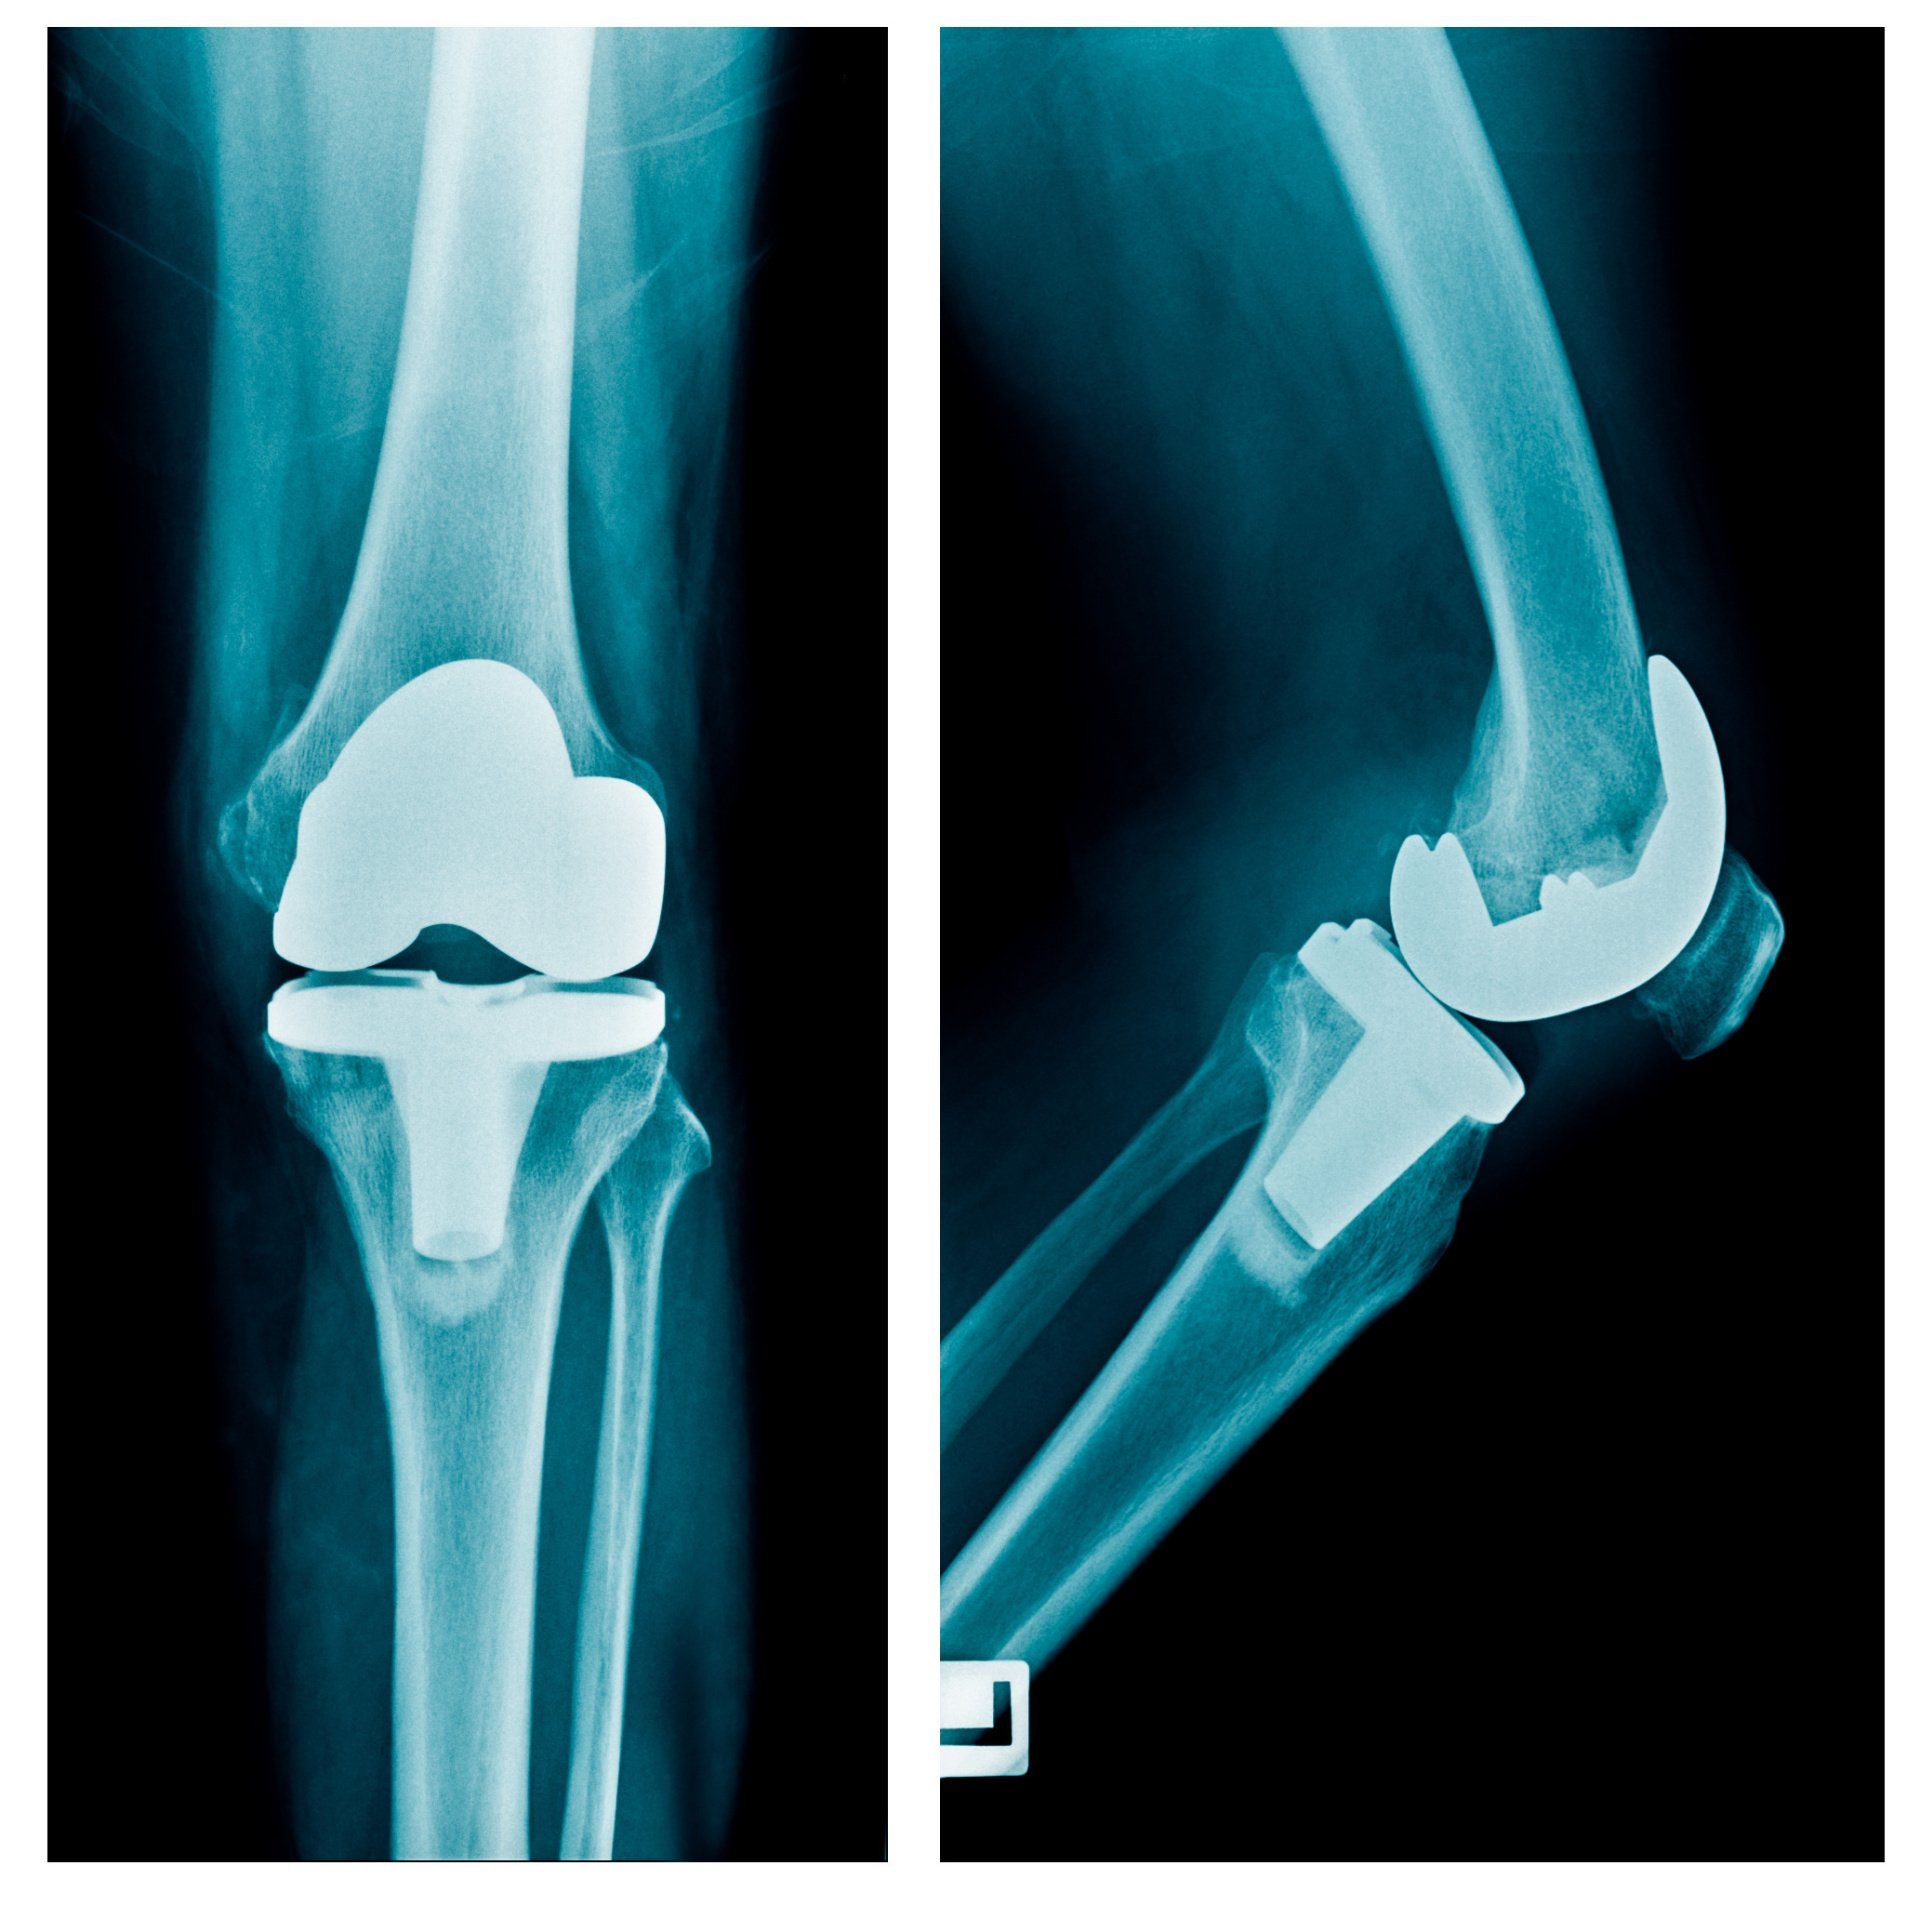 Total Knee Replacement (TKR) Dr A. Theodorides Knee Surgeon Specialist